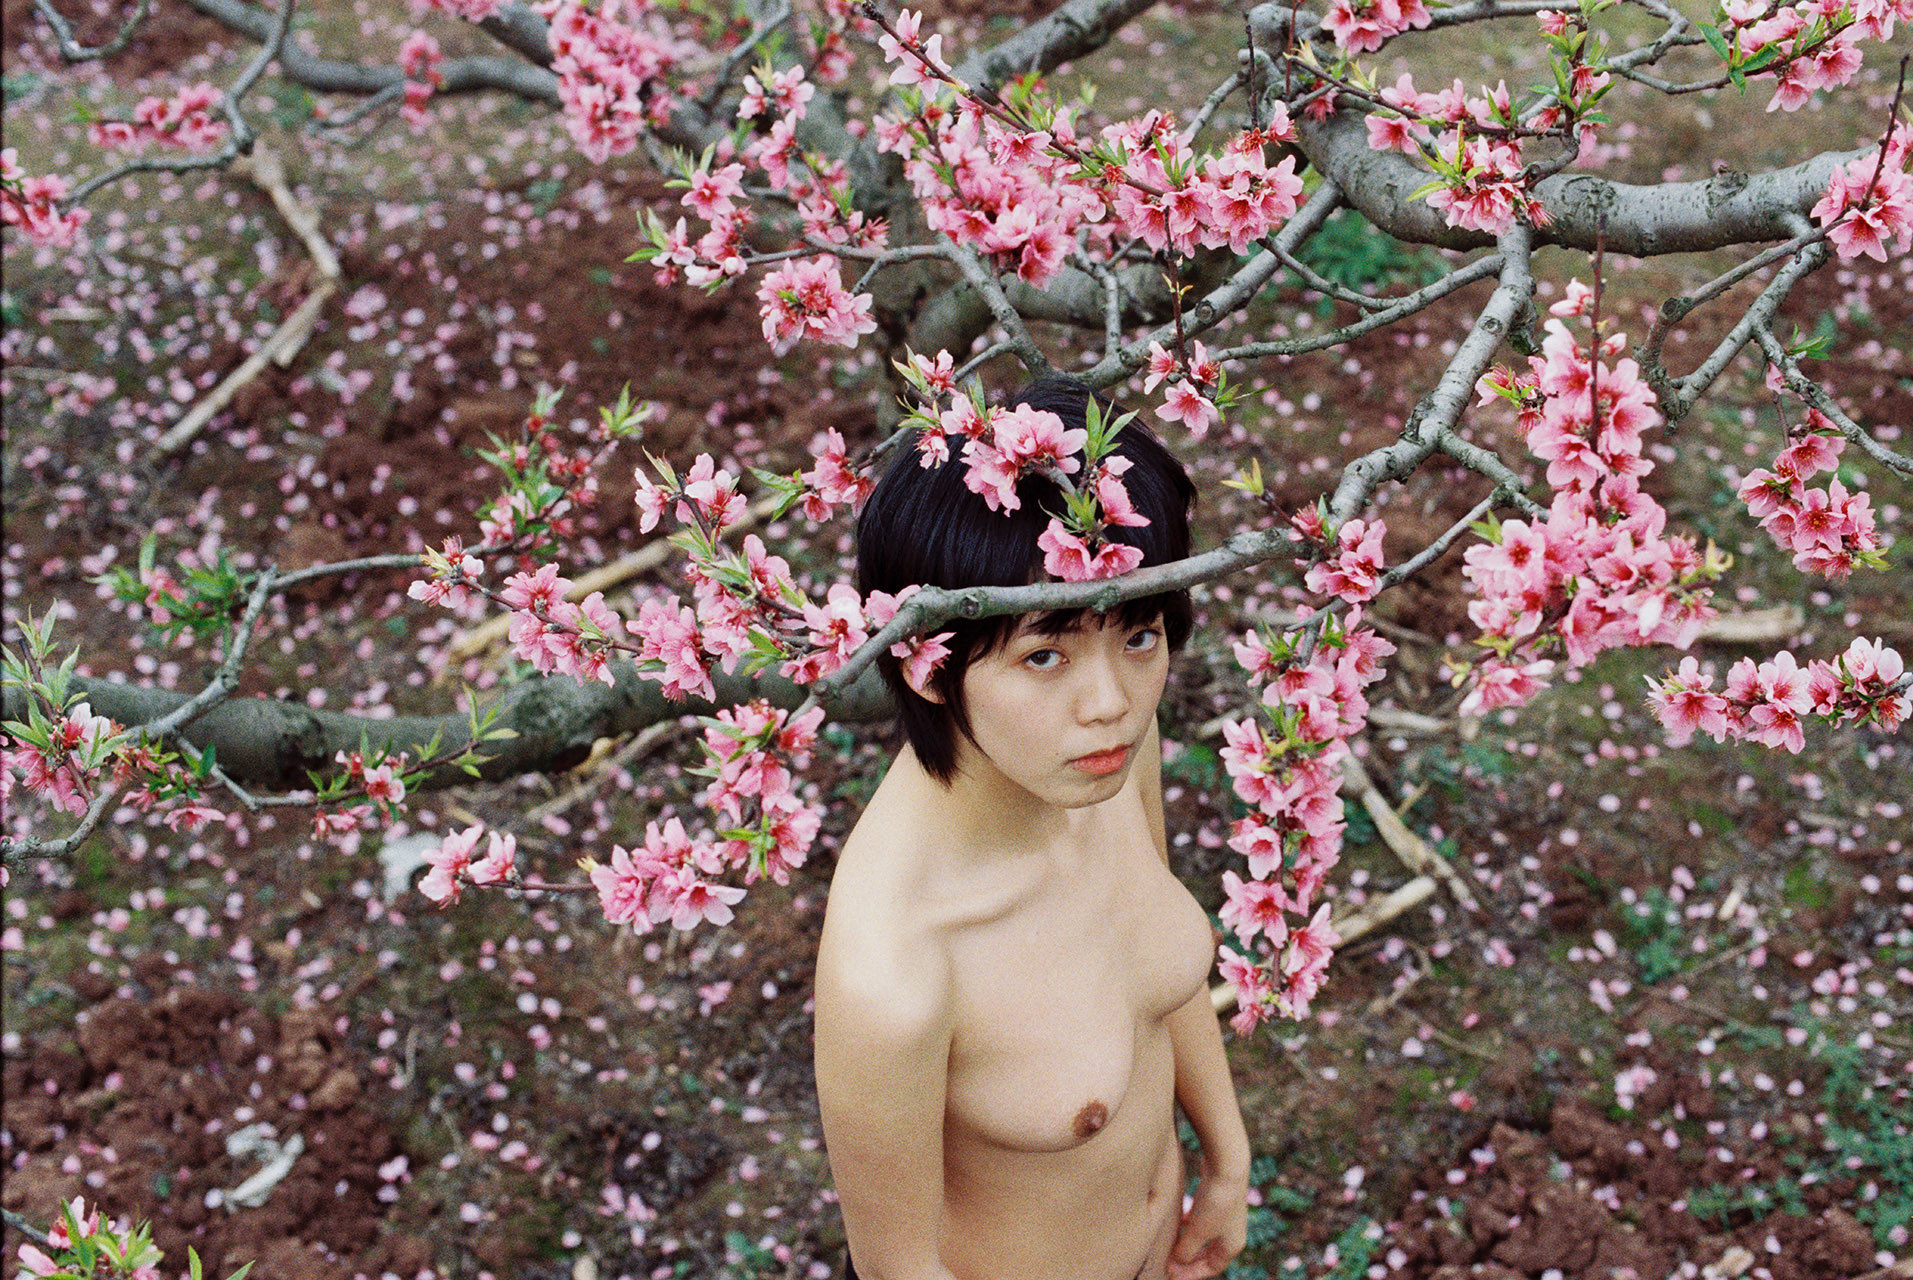 A bare-chested woman standing underneath a tree with blossoms looks up at the camera